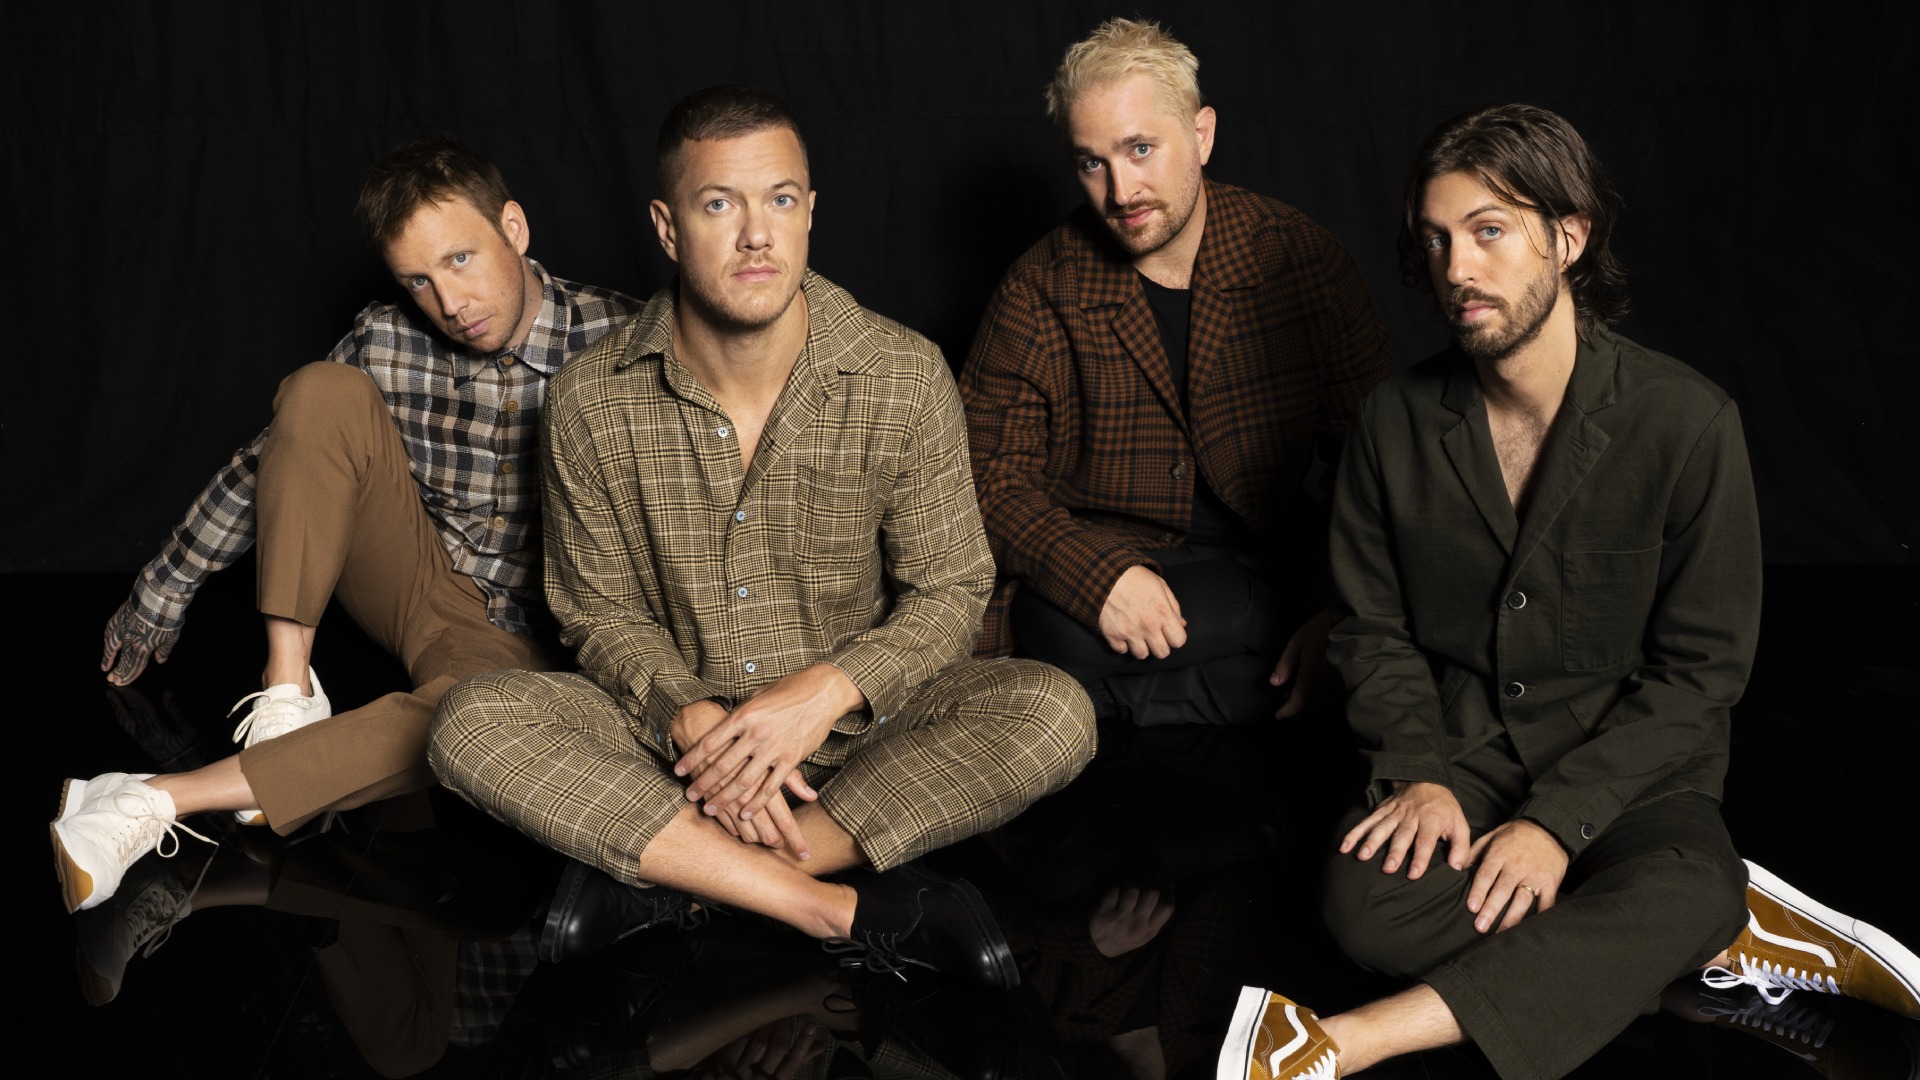 10 Best Imagine Dragons Songs of All Time